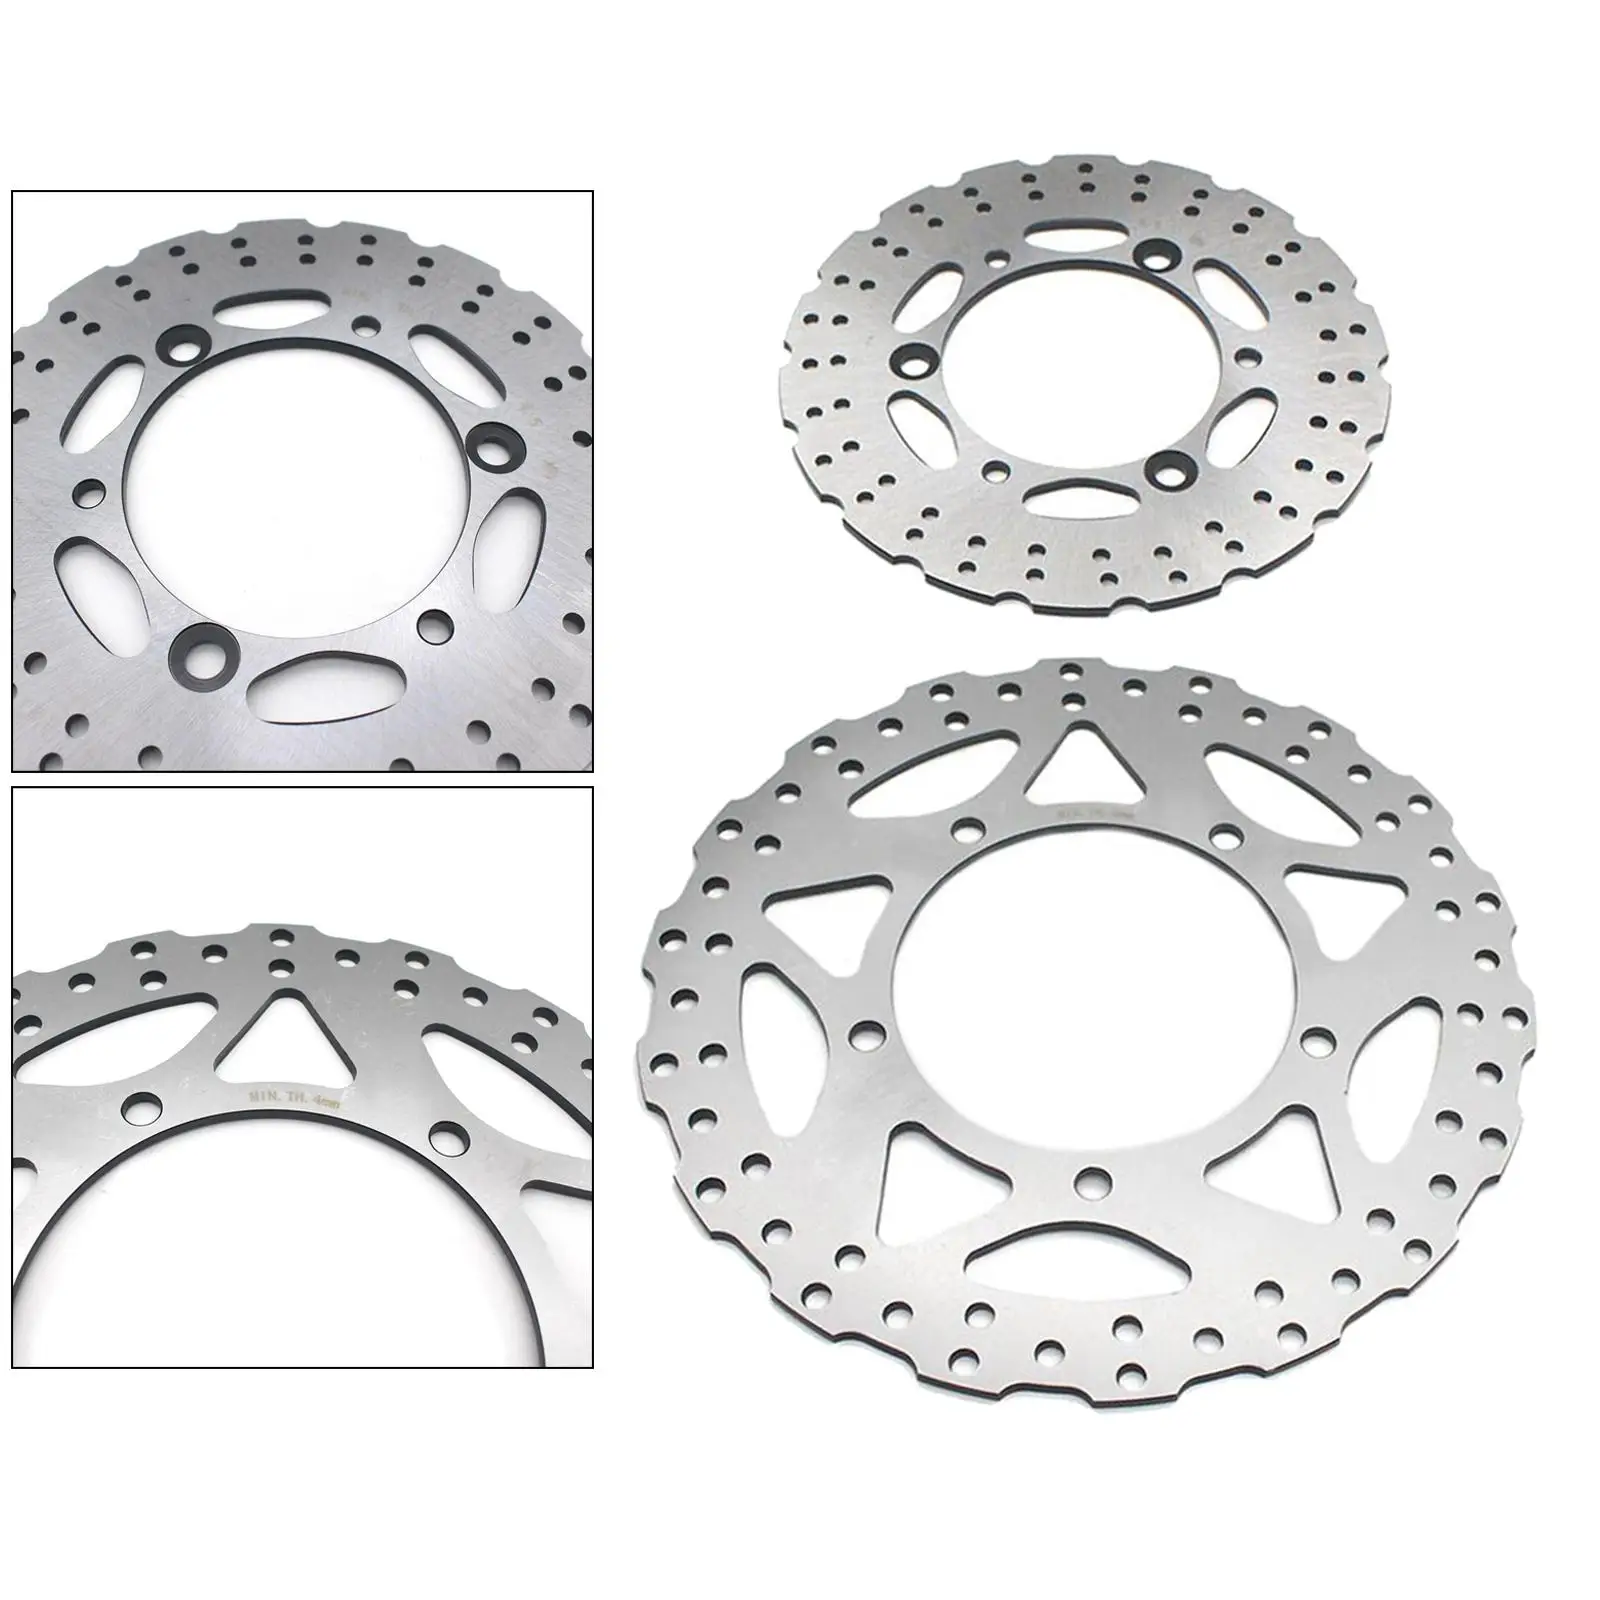 New Motorcycles Round Brake Wheel Disc Rotor, Fit for 300  13-18, for Accessory